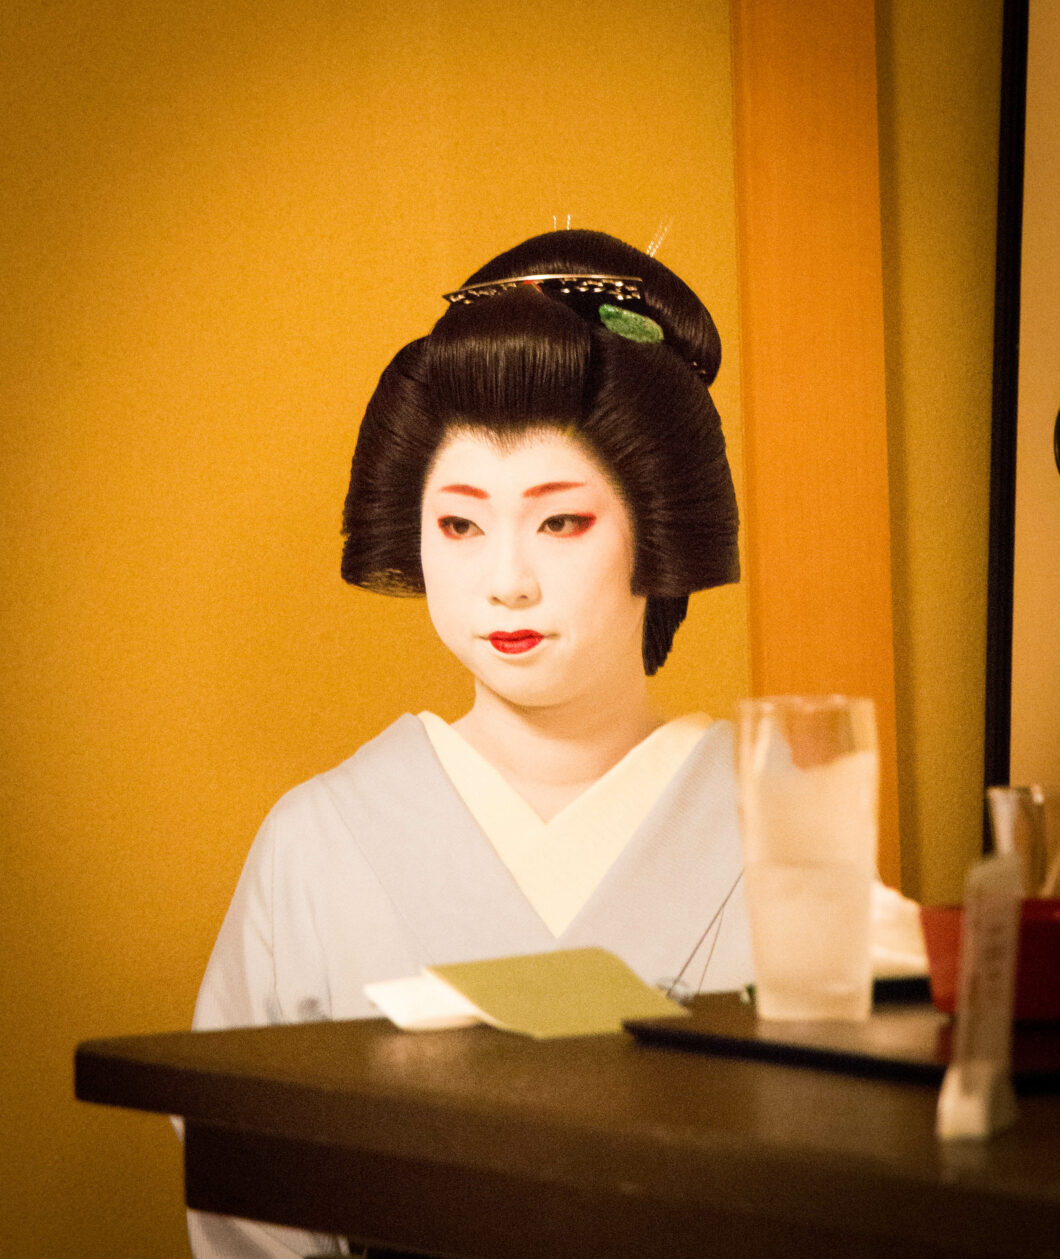 A young Japanese woman dressed as a traditional Geisha kneels in front of a yellow wall.